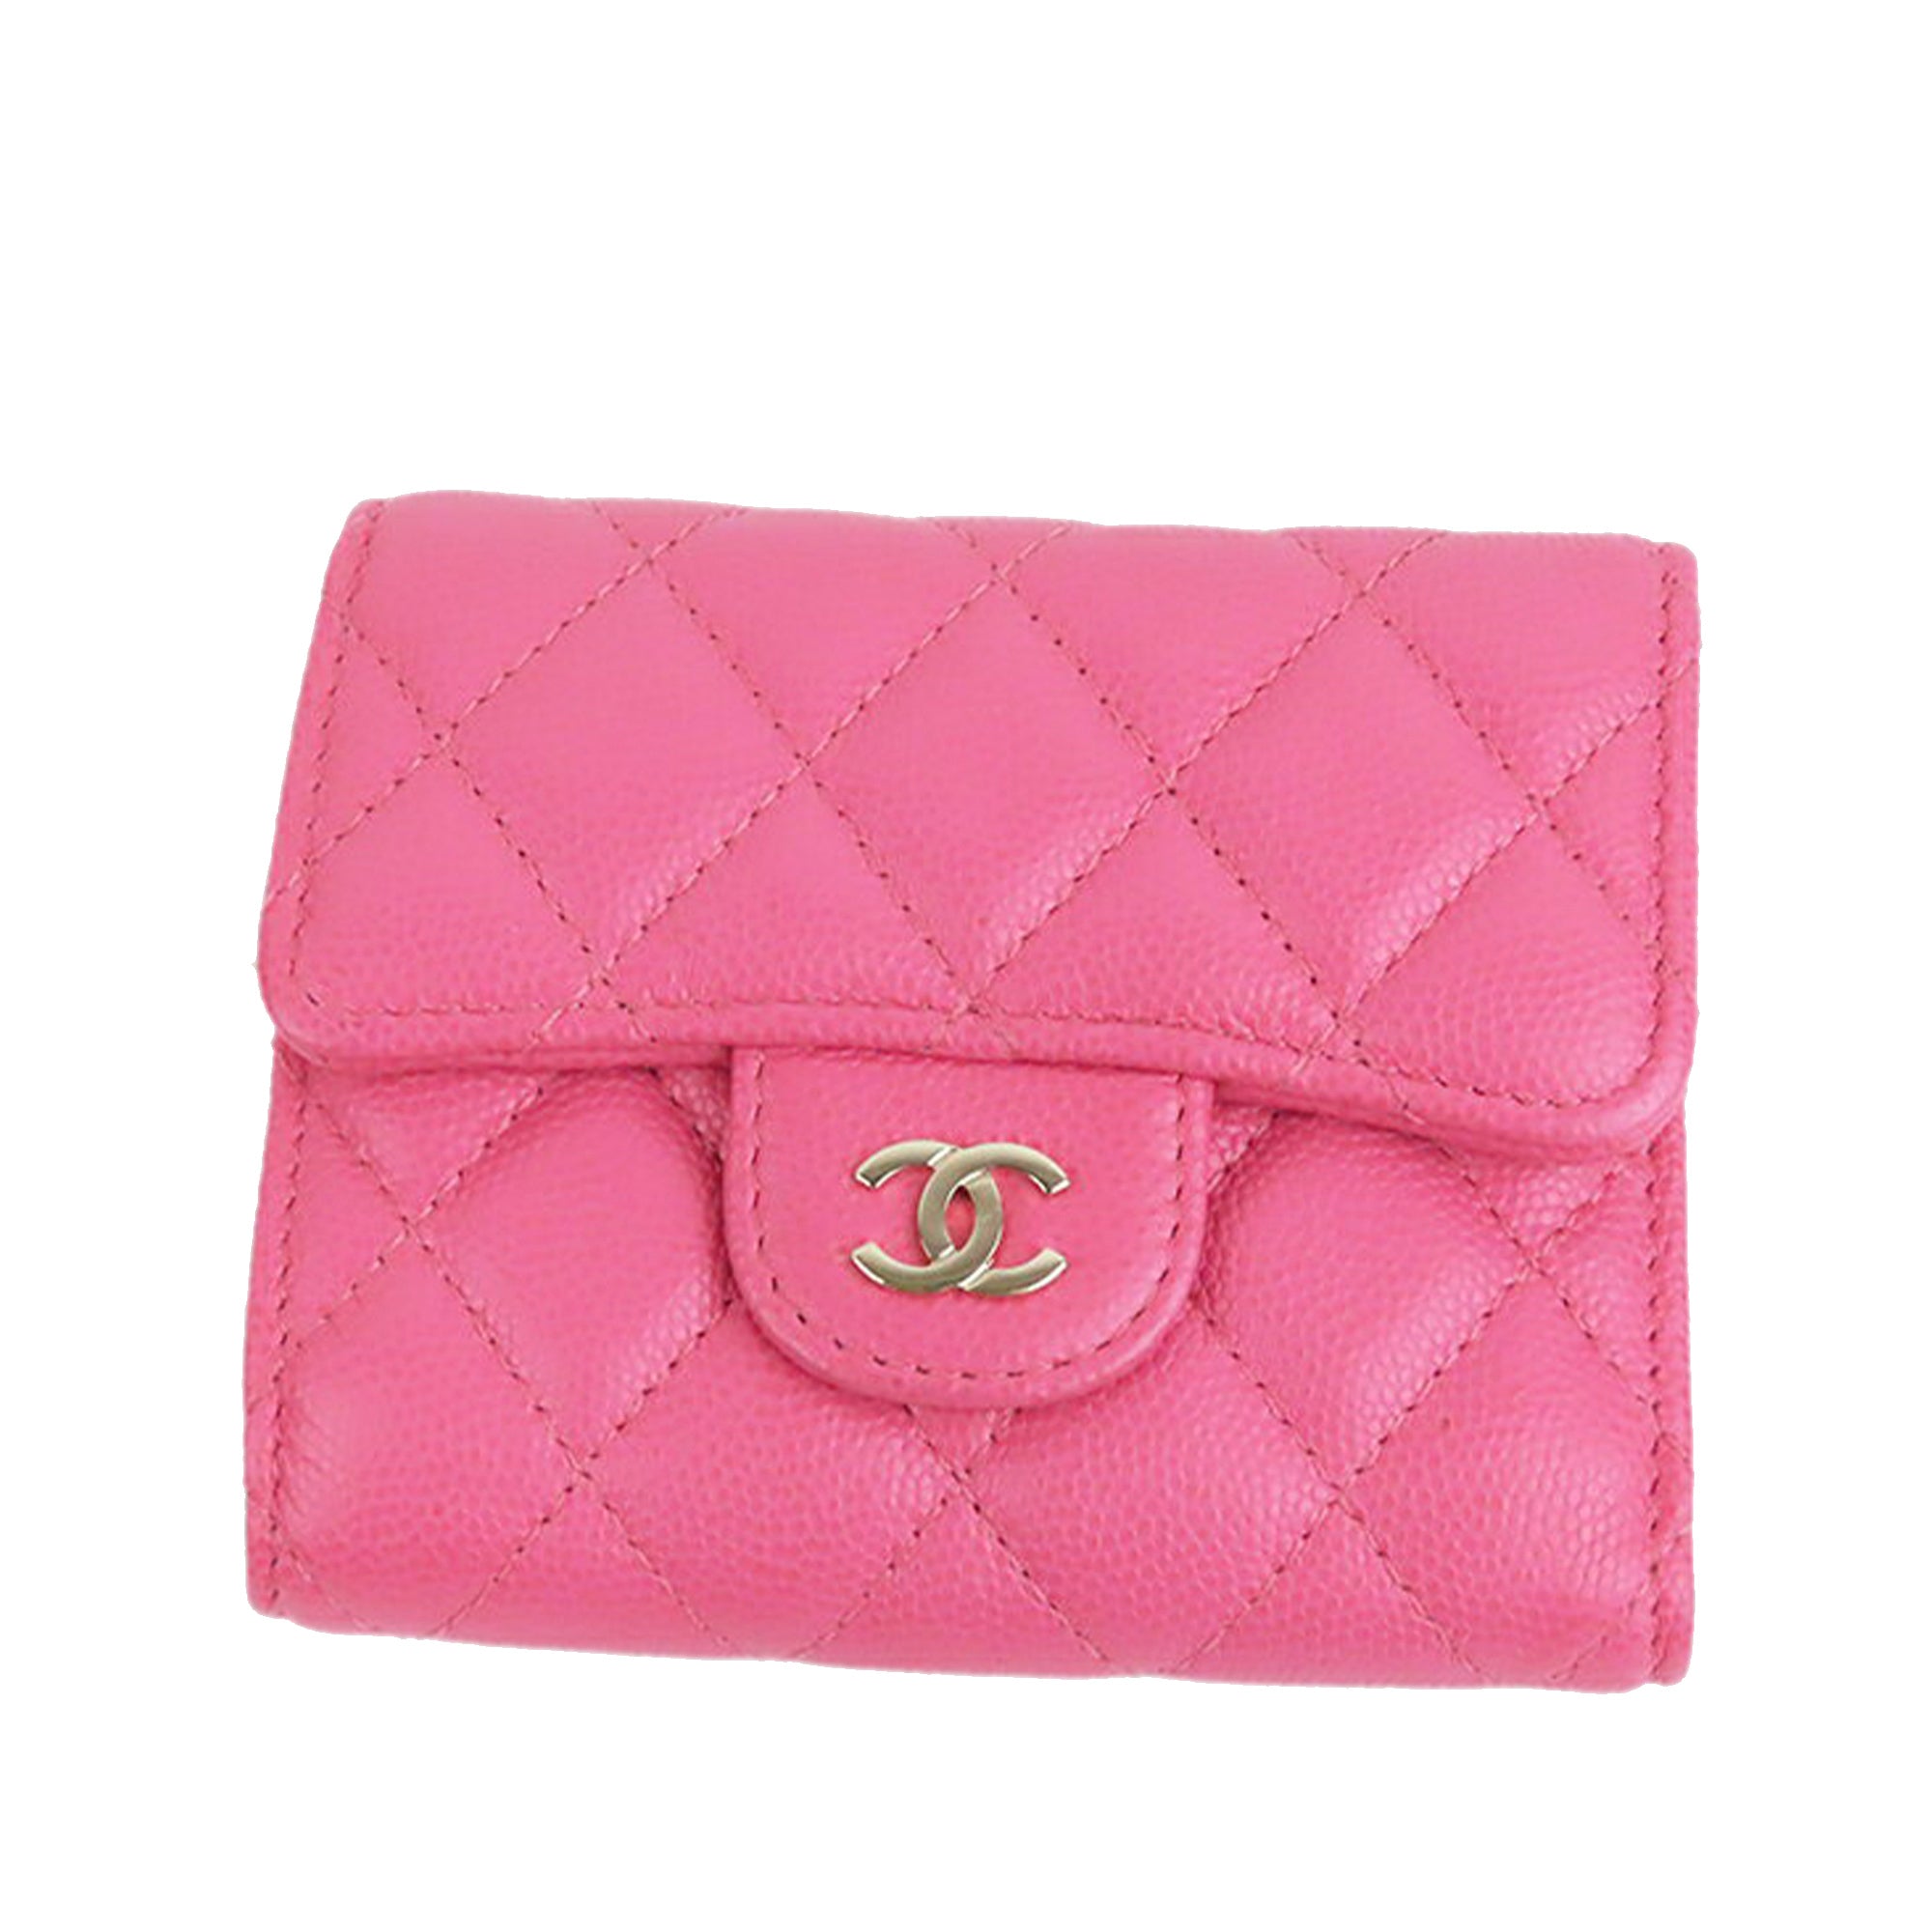 Converting The Vintage Timeless Chanel Wallet to a WOC